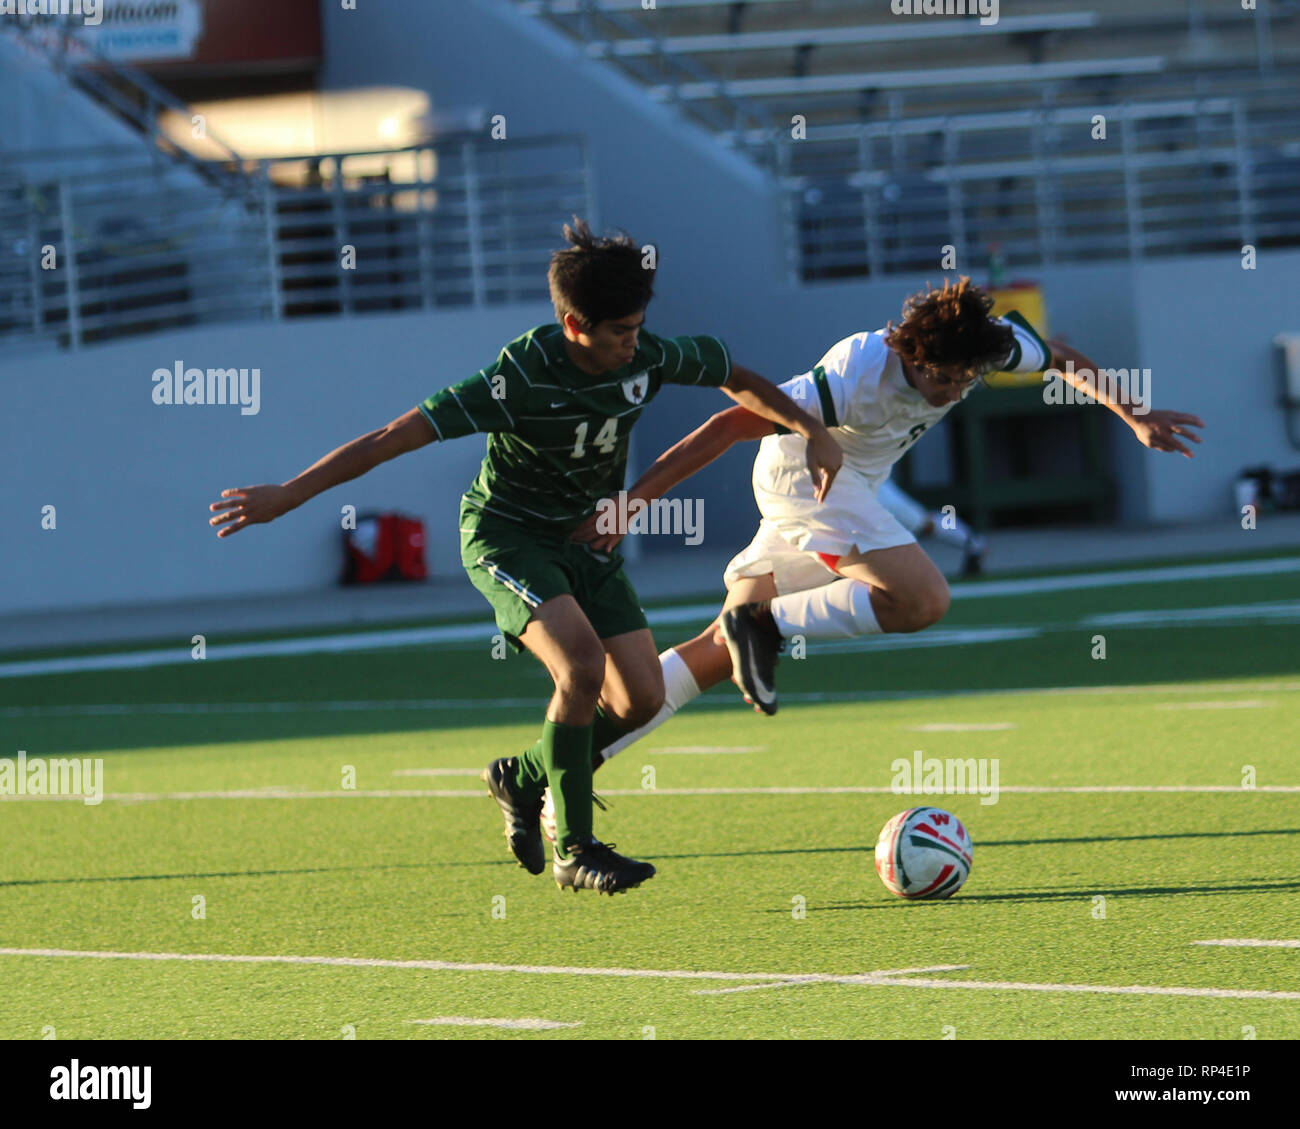 Soccer player goes flying past the ball after a shove from a defender during a boys high school game at Woodforest Bank Stadium in Shenandoah, Tex. Stock Photo